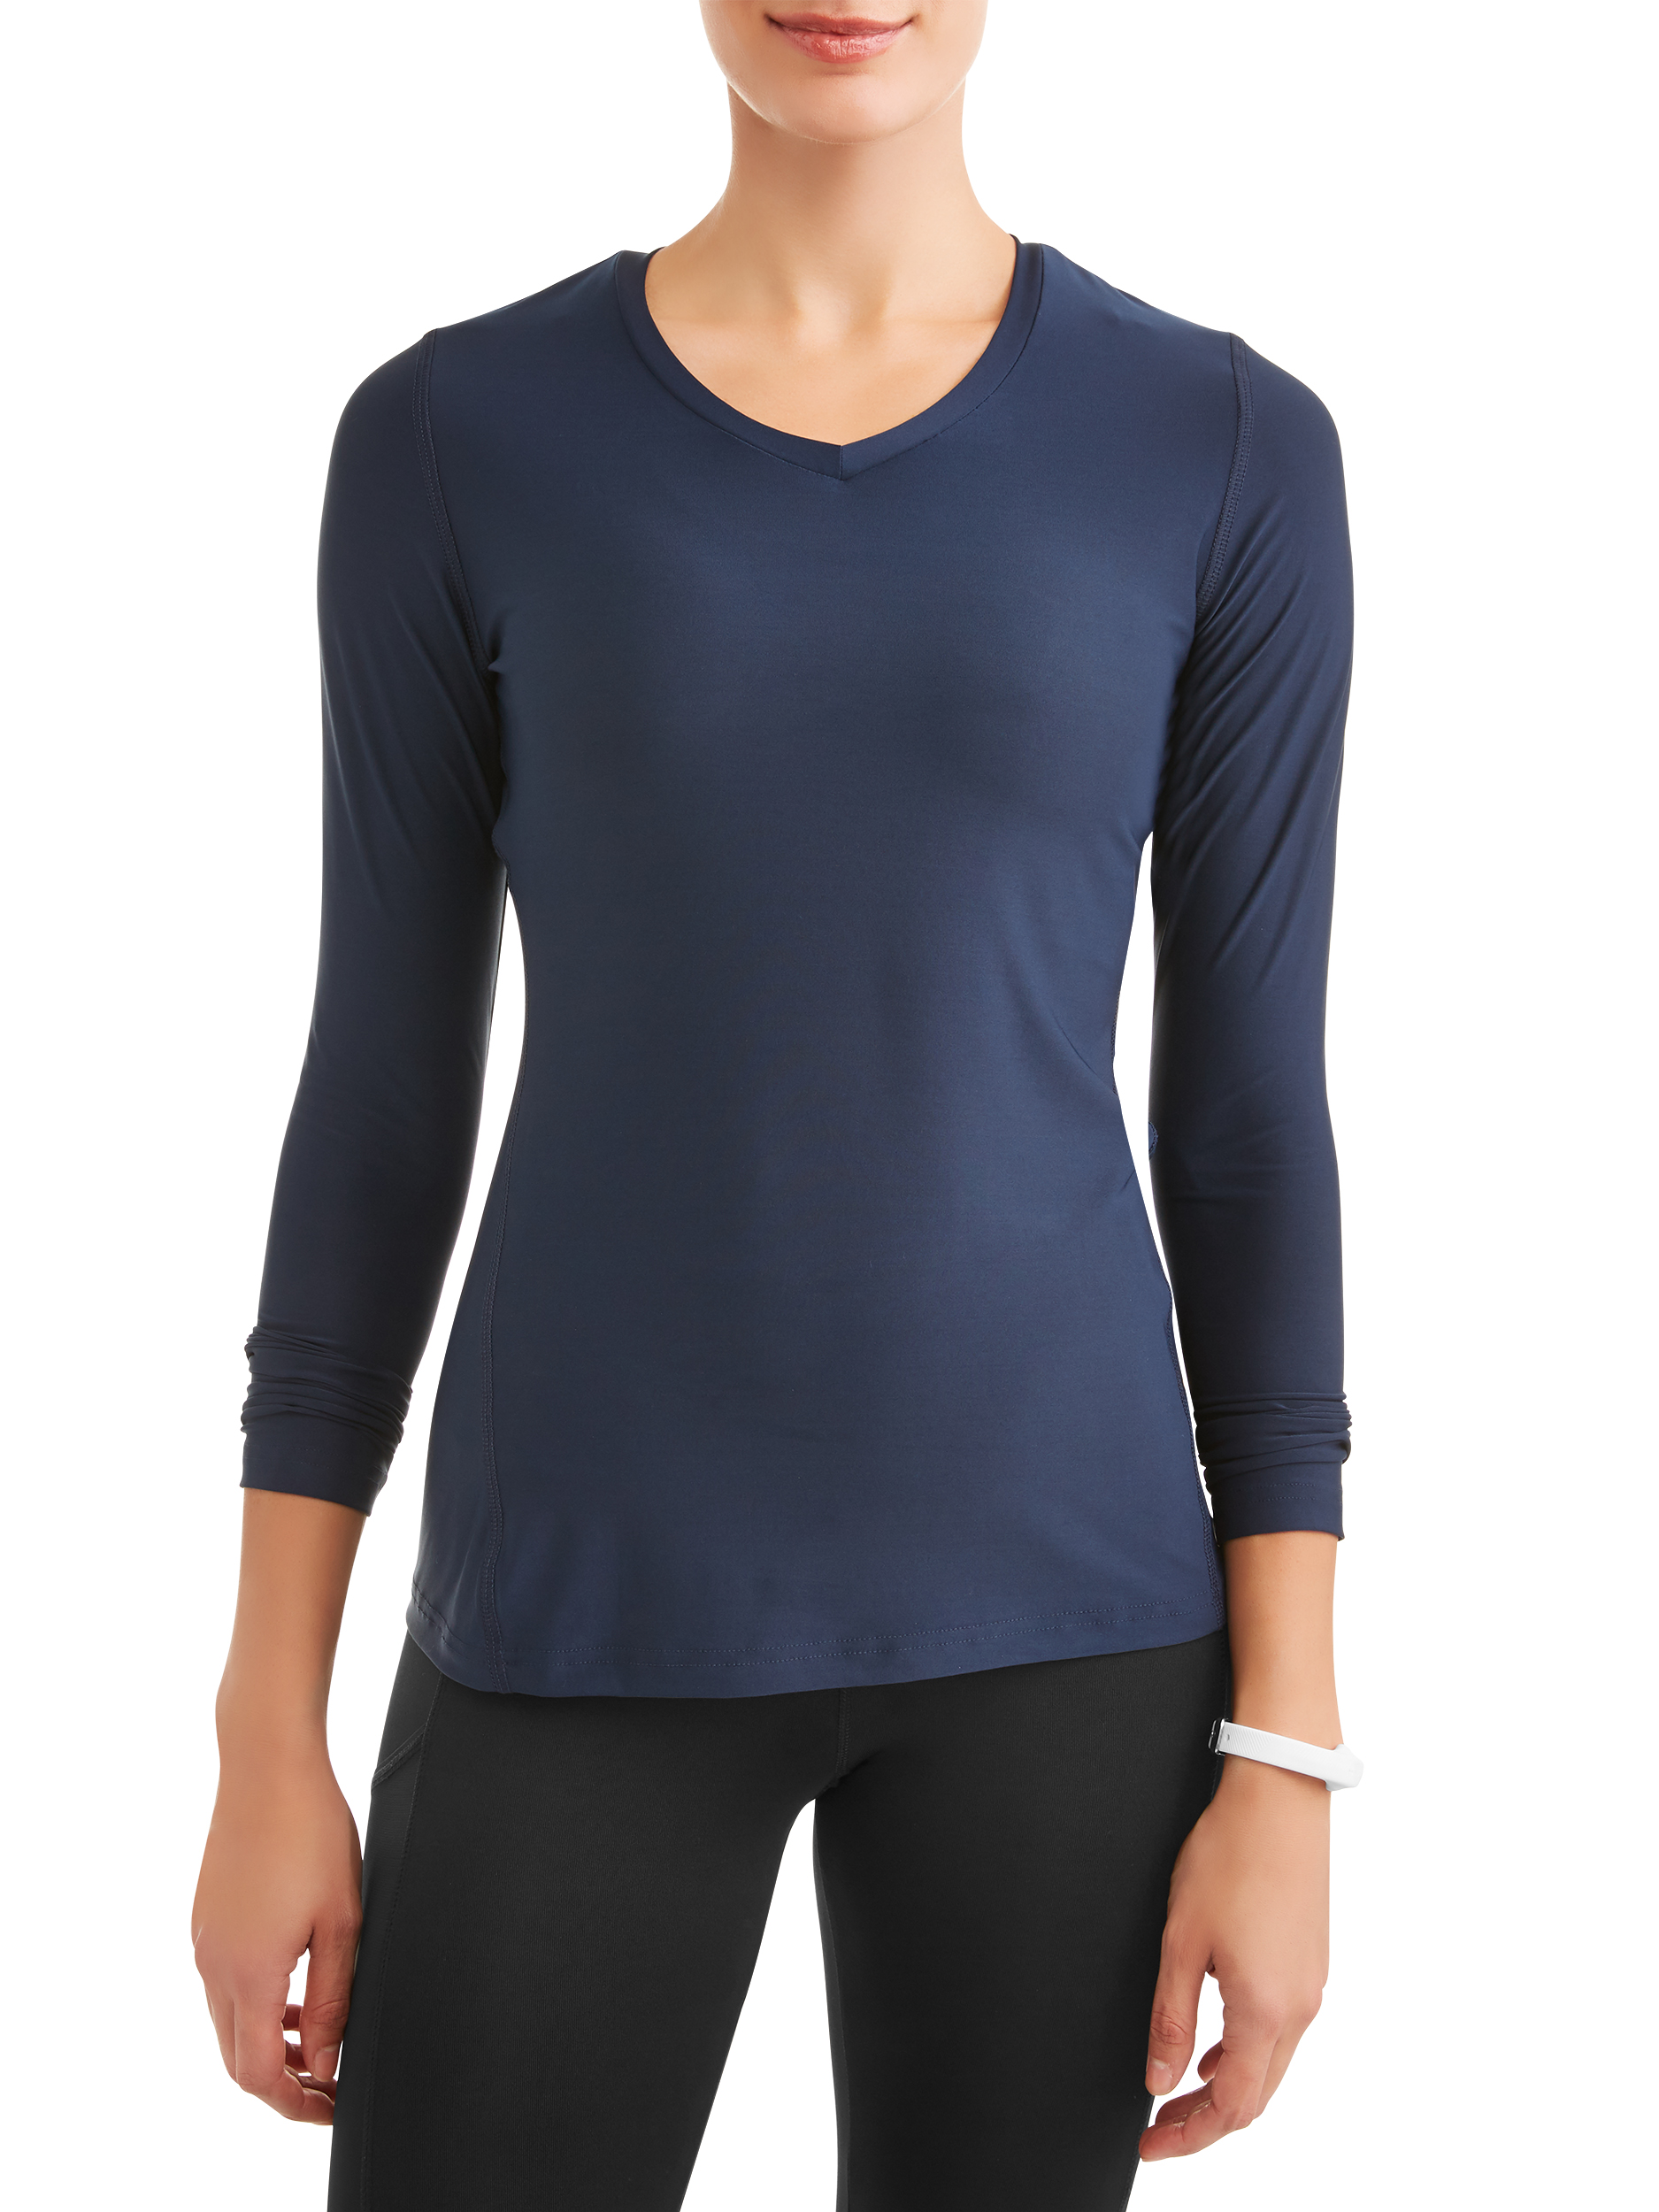 New York Laundry Women’s Active Long Sleeve V-Neck Mesh Top - image 2 of 4